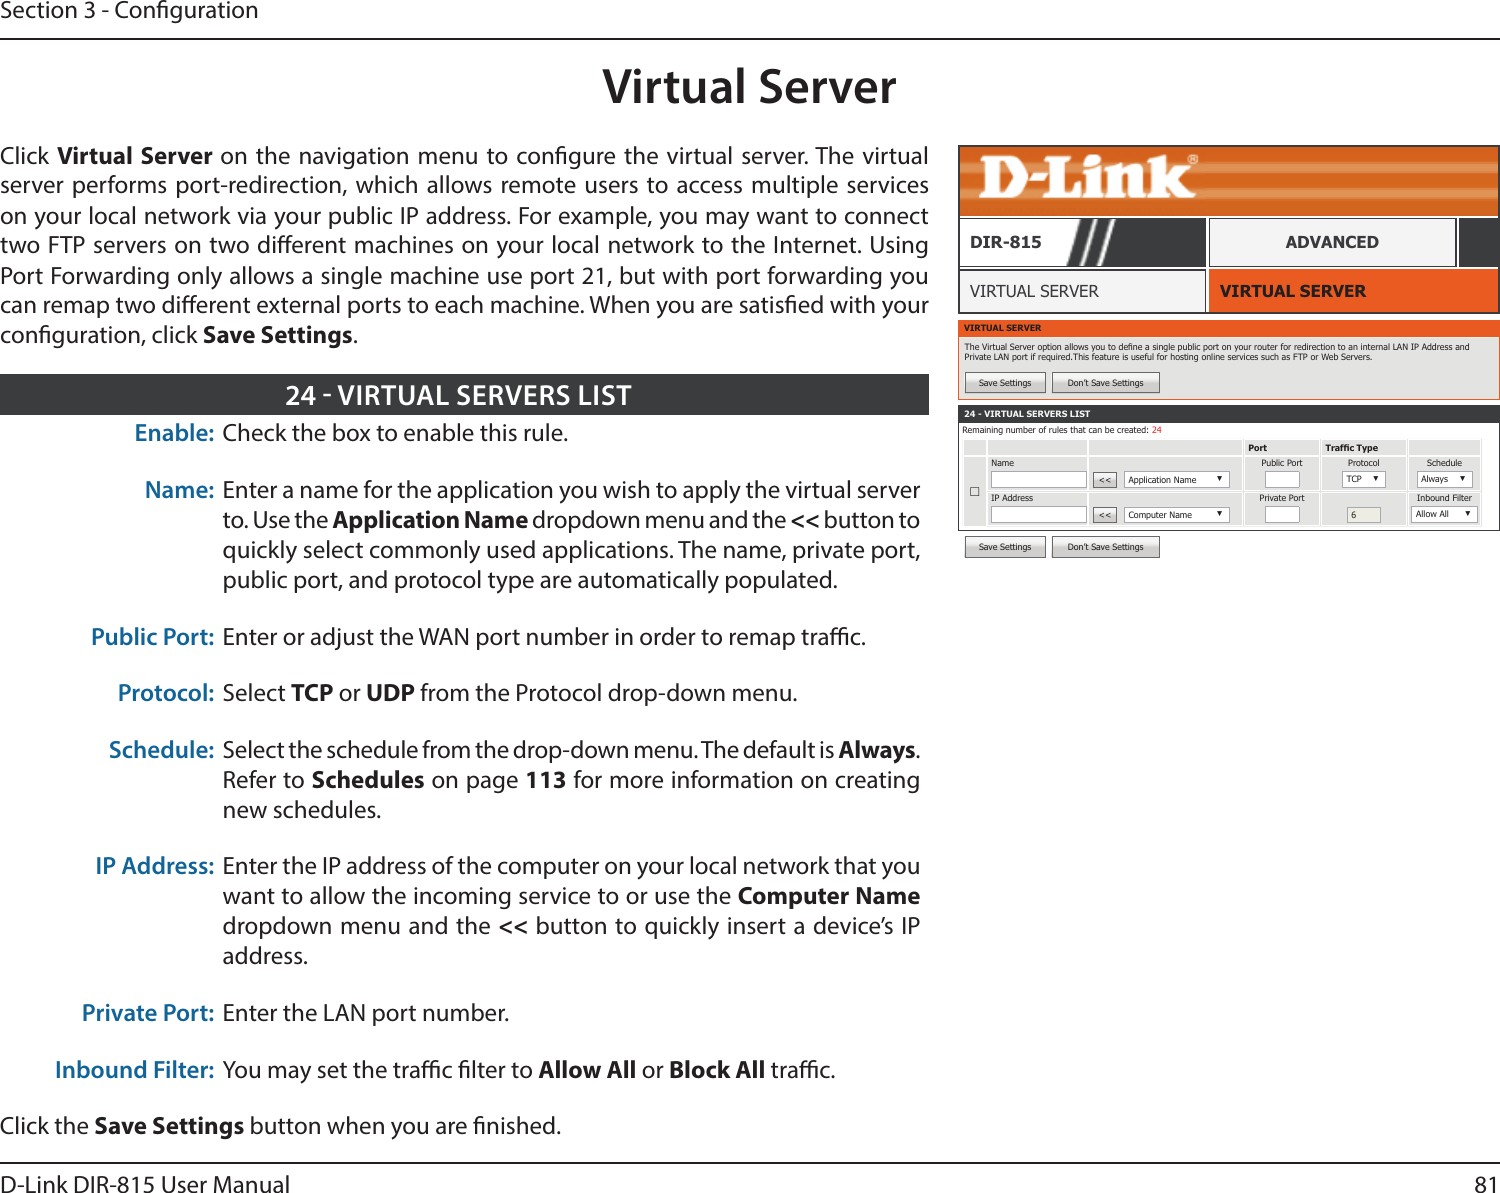 81D-Link DIR-815 User ManualSection 3 - CongurationVirtual ServerVIRTUAL SERVERVIRTUAL SERVERDIR-815 ADVANCEDEnable: Check the box to enable this rule.Name: Enter a name for the application you wish to apply the virtual server to. Use the Application Name dropdown menu and the &lt;&lt; button to quickly select commonly used applications. The name, private port, public port, and protocol type are automatically populated.Public Port: Enter or adjust the WAN port number in order to remap trac.Protocol: Select TCP or UDP from the Protocol drop-down menu.Schedule: Select the schedule from the drop-down menu. The default is Always. Refer to Schedules on page 113 for more information on creating new schedules.IP Address: Enter the IP address of the computer on your local network that you want to allow the incoming service to or use the Computer Name dropdown menu and the &lt;&lt; button to quickly insert a device’s IP address.Private Port: Enter the LAN port number.Inbound Filter: You may set the trac lter to Allow All or Block All trac.Click the Save Settings button when you are nished.24  VIRTUAL SERVERS LISTVIRTUAL SERVERThe Virtual Server option allows you to dene a single public port on your router for redirection to an internal LAN IP Address and Private LAN port if required.This feature is useful for hosting online services such as FTP or Web Servers.Save Settings Don’t Save Settings24 - VIRTUAL SERVERS LISTRemaining number of rules that can be created: 24Port Trafc Type☐Name&lt;&lt;  Application Name ▼Public Port Protocol TCP ▼ScheduleAlways ▼IP Address&lt;&lt;  Computer Name ▼Private Port6Inbound FilterAllow All ▼Save Settings Don’t Save SettingsClick Virtual Server on the navigation menu to congure the virtual server. The virtual server performs port-redirection, which allows remote users to access multiple services on your local network via your public IP address. For example, you may want to connect two FTP servers on two dierent machines on your local network to the Internet. Using Port Forwarding only allows a single machine use port 21, but with port forwarding you can remap two dierent external ports to each machine. When you are satised with your conguration, click Save Settings.